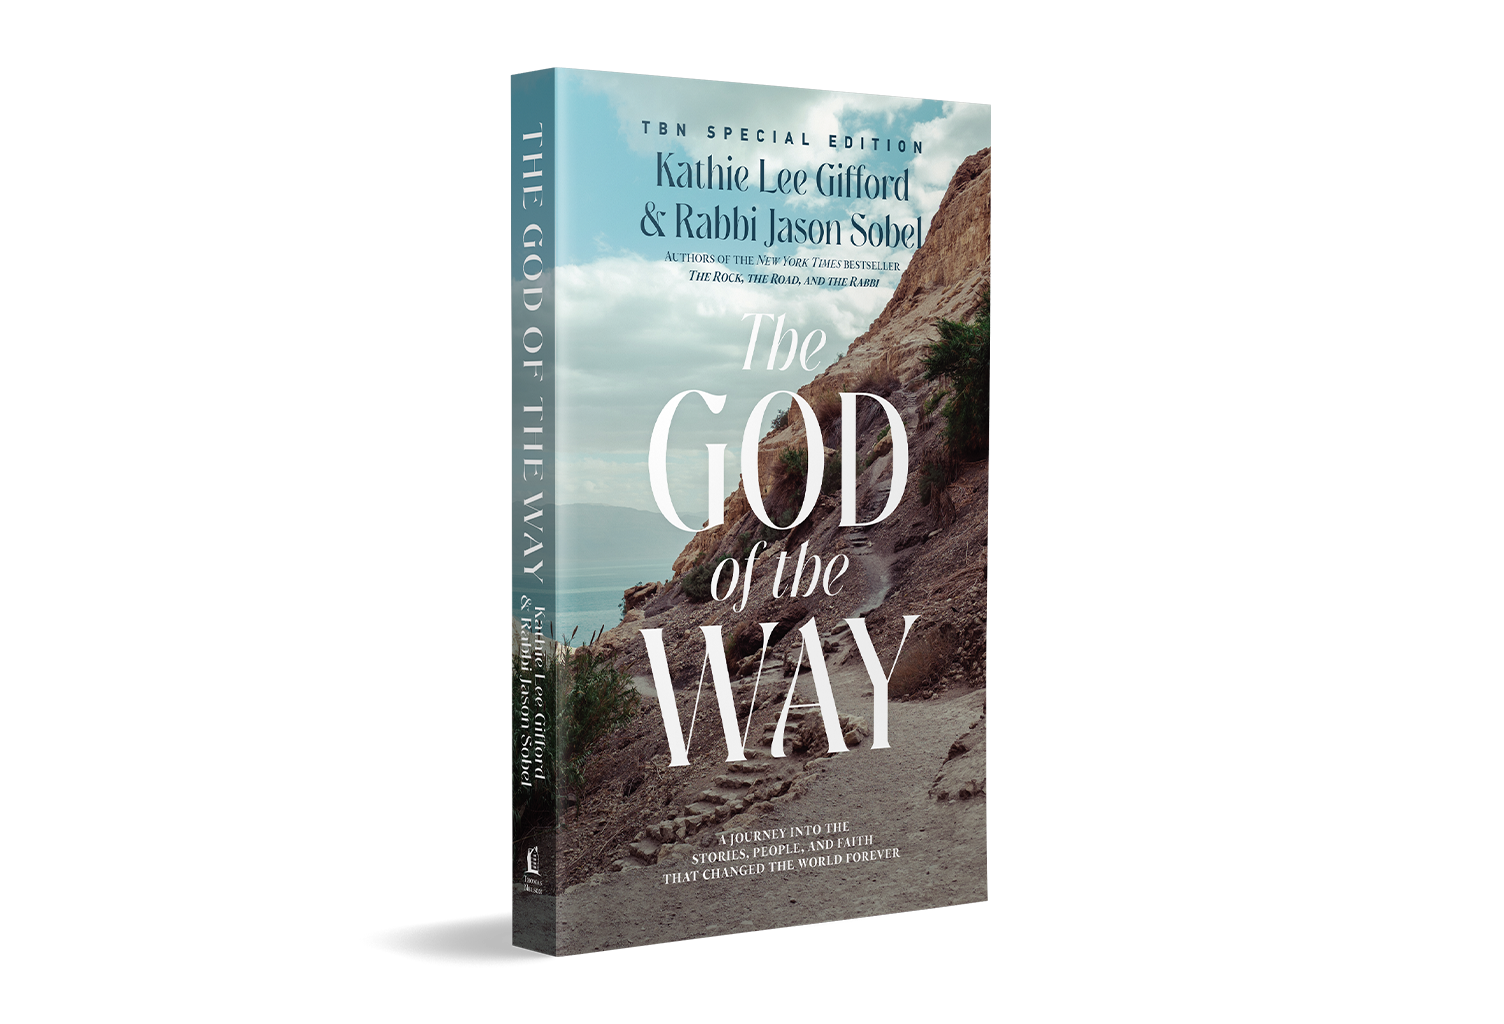 The God of the Way by Kathie Lee Gifford & Rabbi Jason Sobel from TBN